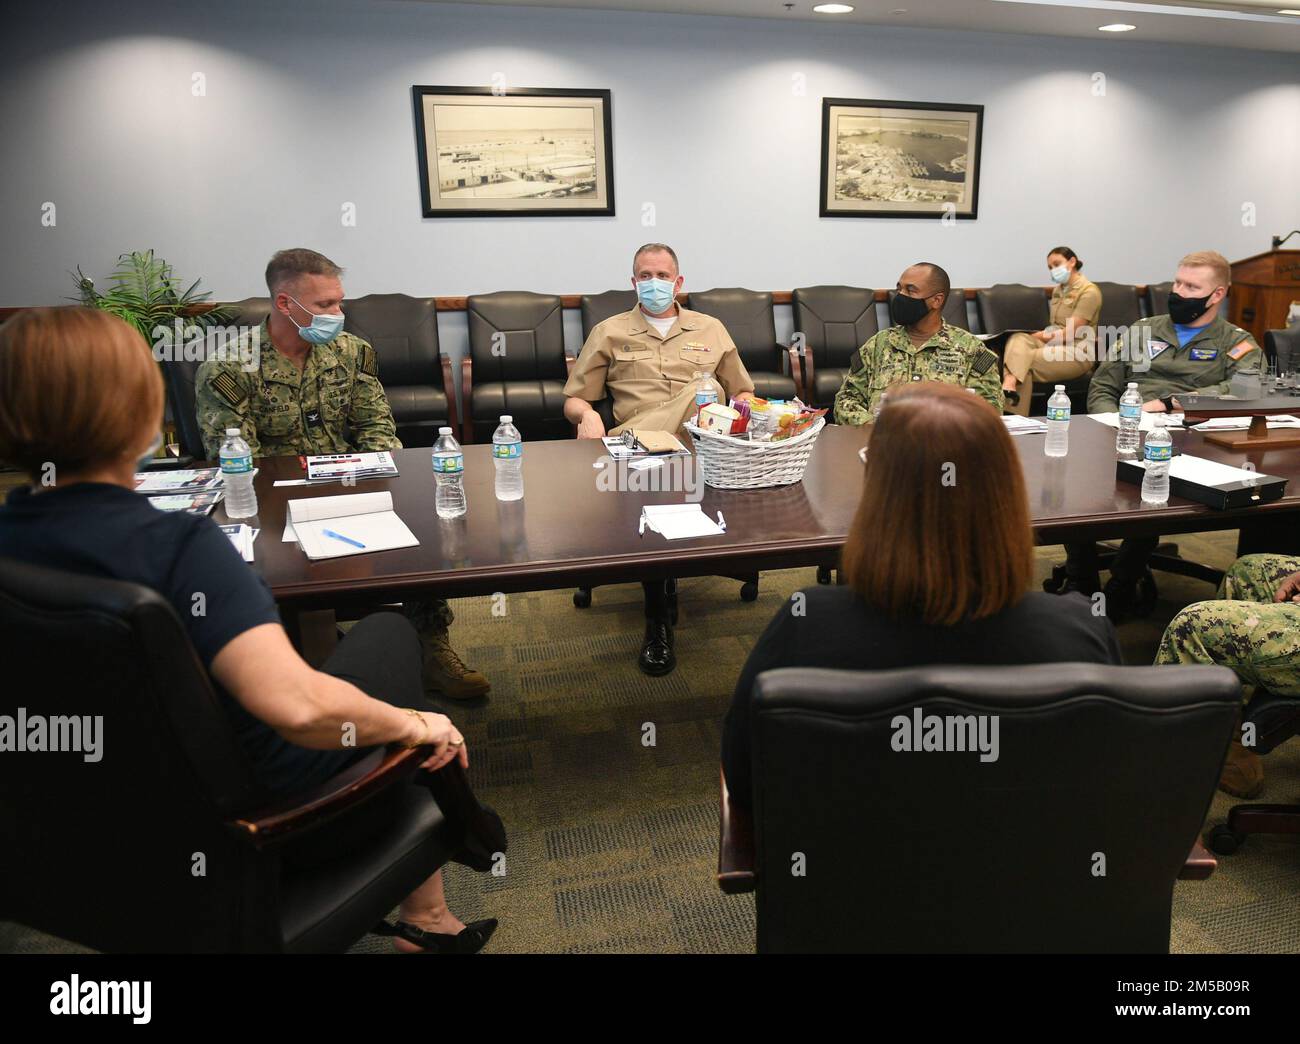 220217-N-DB801-0331  MAYPORT, Fla. – (Feb. 17, 2022) – Rear Adm. Jim Aiken, Commander, U.S. Naval Forces Southern Command/U.S. 4th Fleet, third from left, speaks with retired Rear Adm. Dawn Cutler, Executive Vice President and Chief Operations Officer at Navy-Marine Corps Relief Society (NMCRS), left, and local leadership at a meeting on Naval Base Mayport, Feb. 17, 2022. The NMCRS is a non-profit organization that provides financial and educational assistance to active duty Marines and Sailors and their families. The organization provides loans, COVID-19 assistance, visiting nurses, emergency Stock Photo